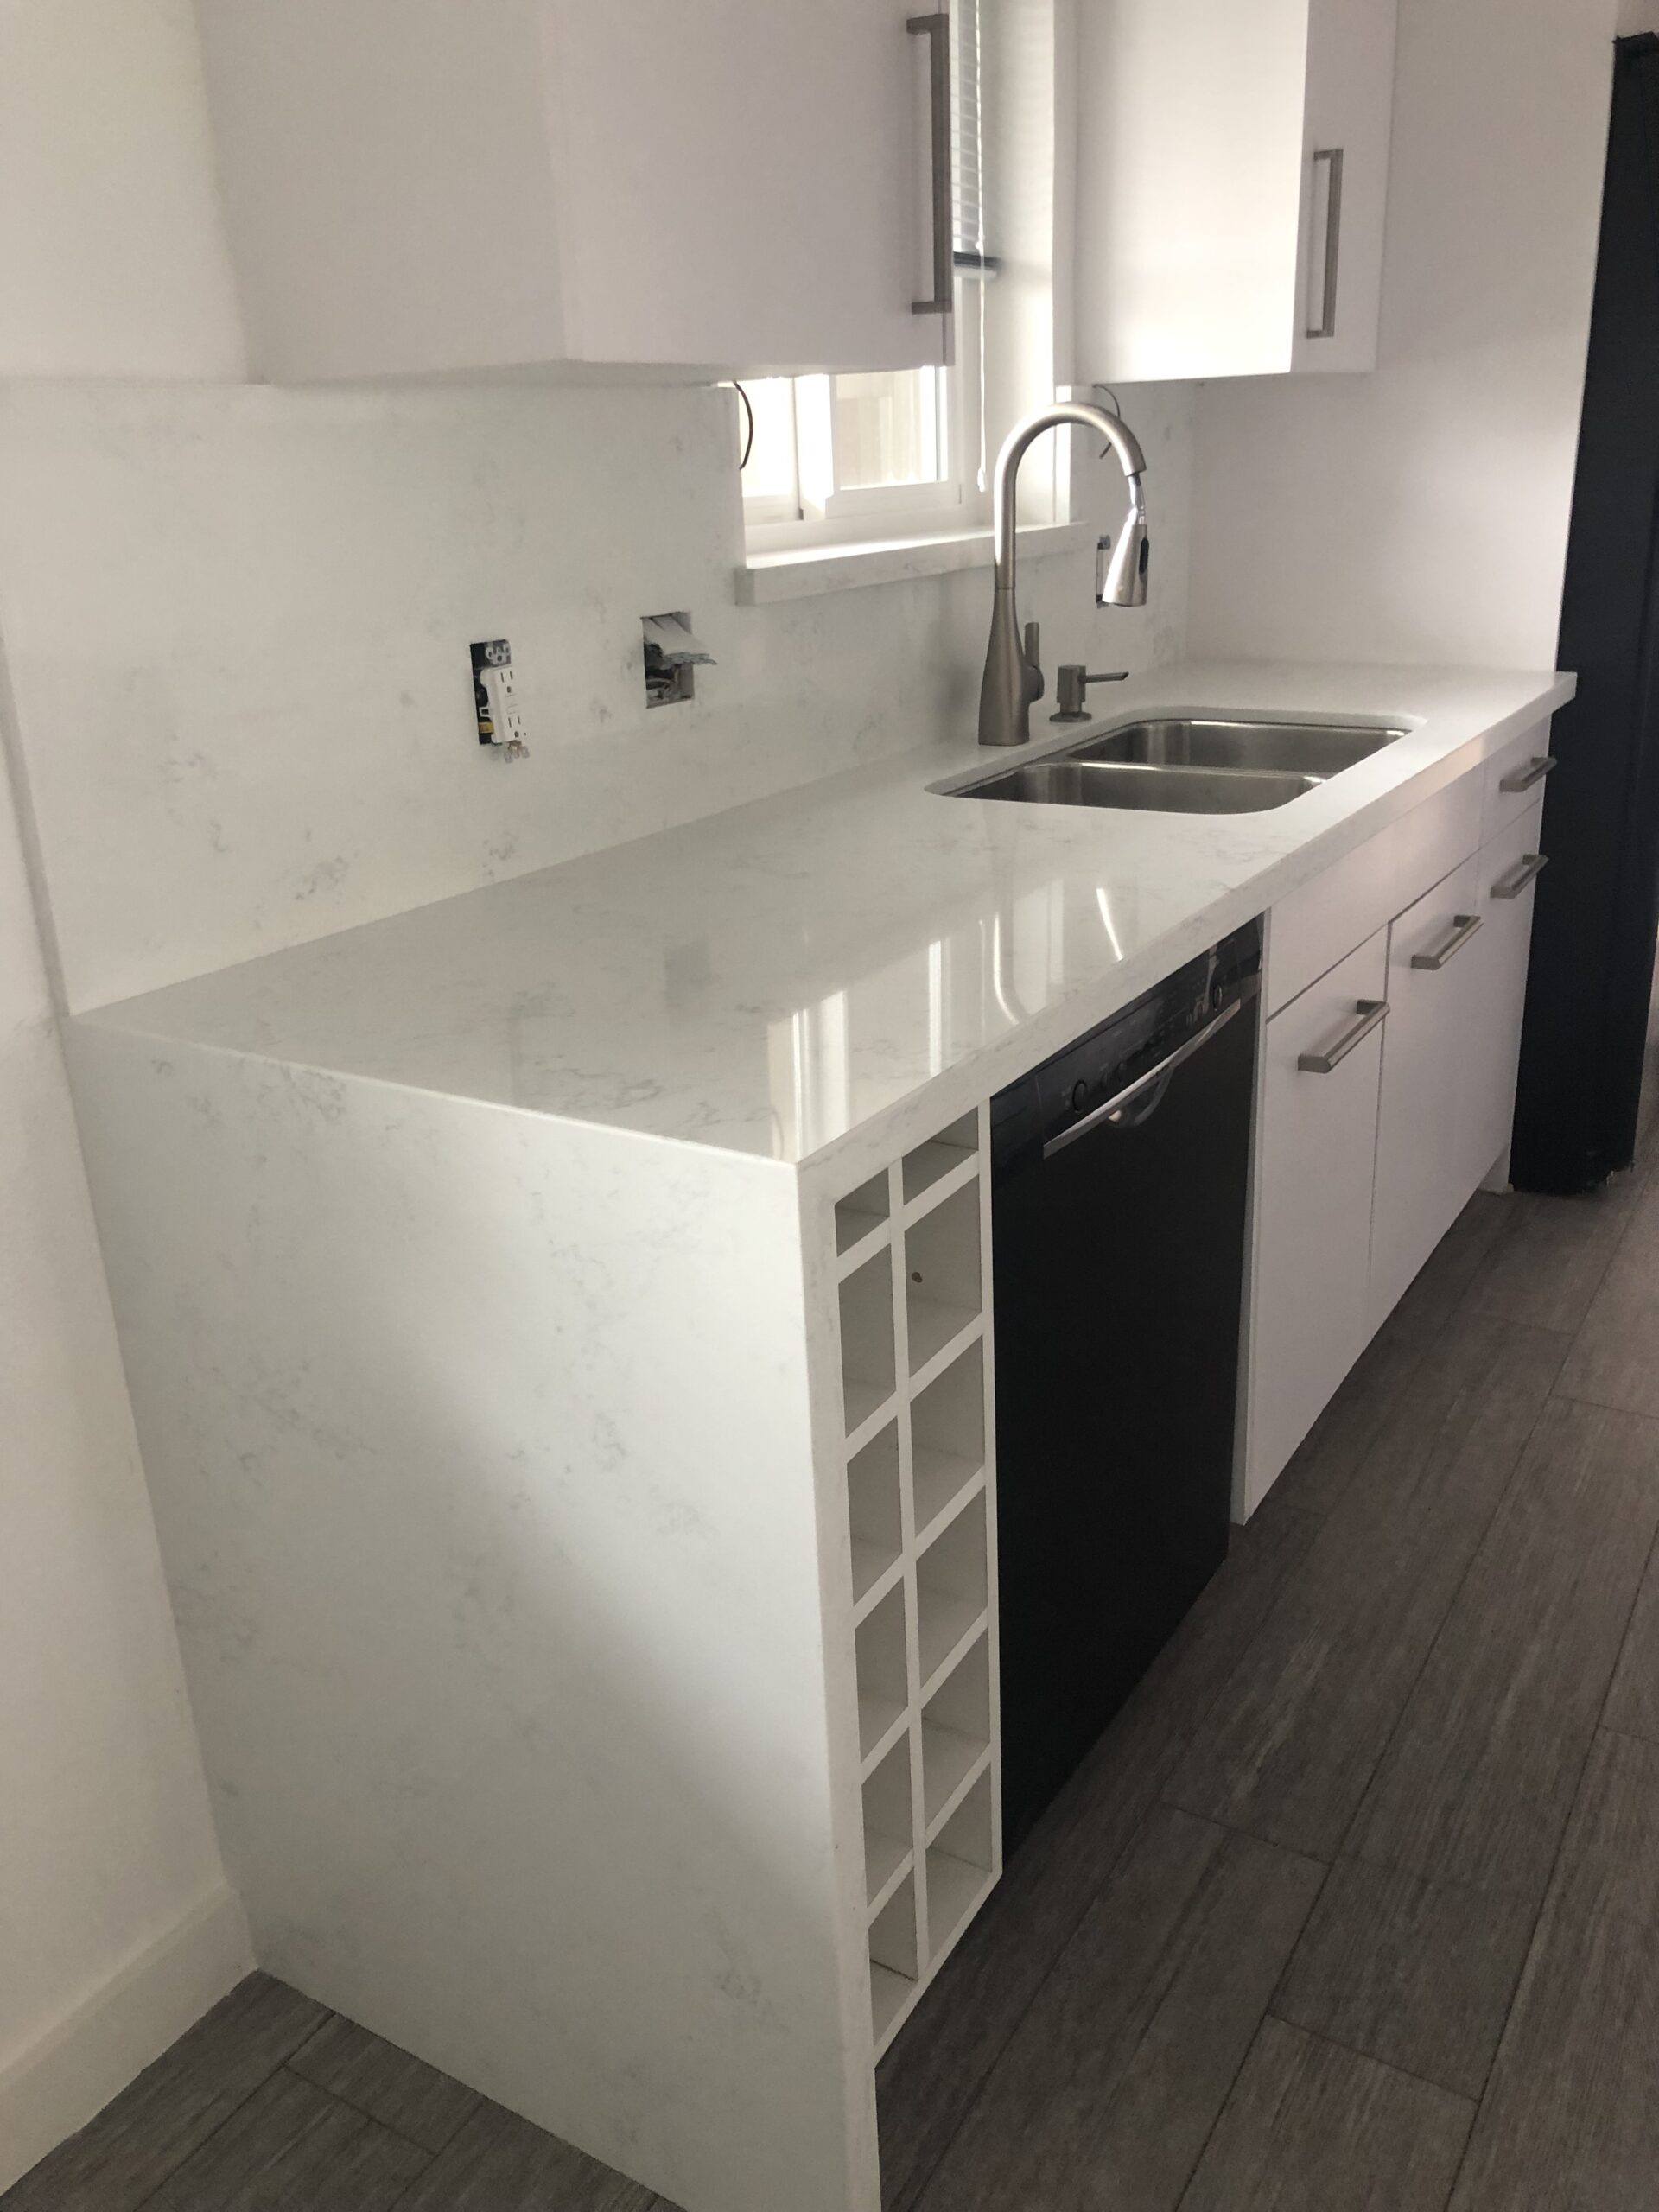 A picture of a kitchen sink, with some cabinets beneath it.